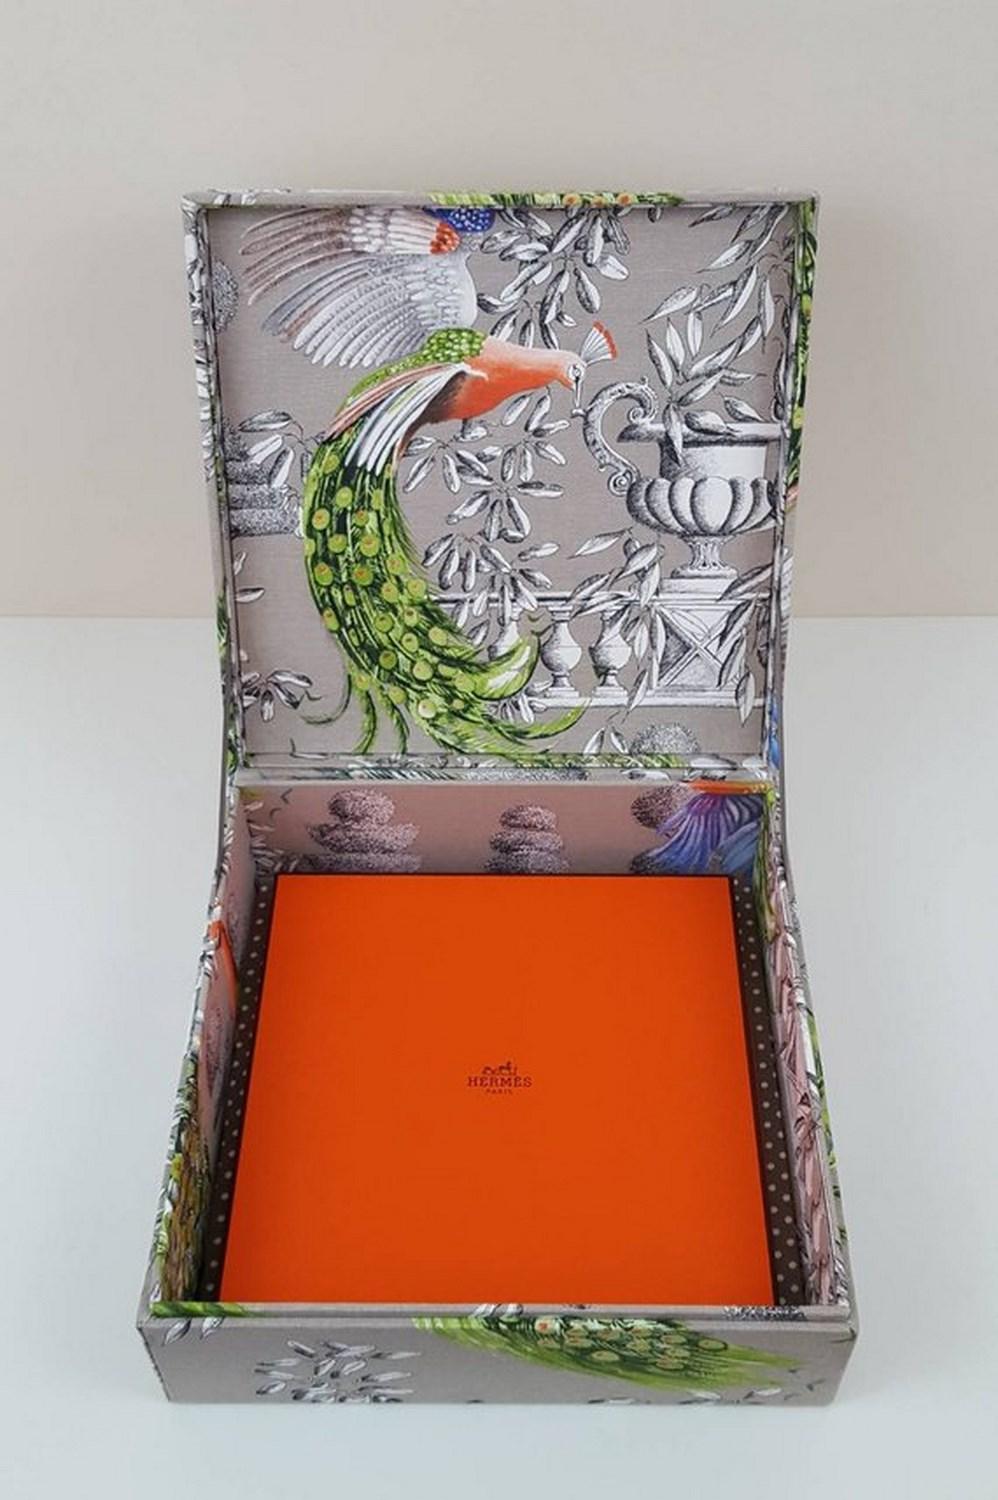 Birds Printed Fabric Decorative Storage Box for Scarves Handmade in France 5